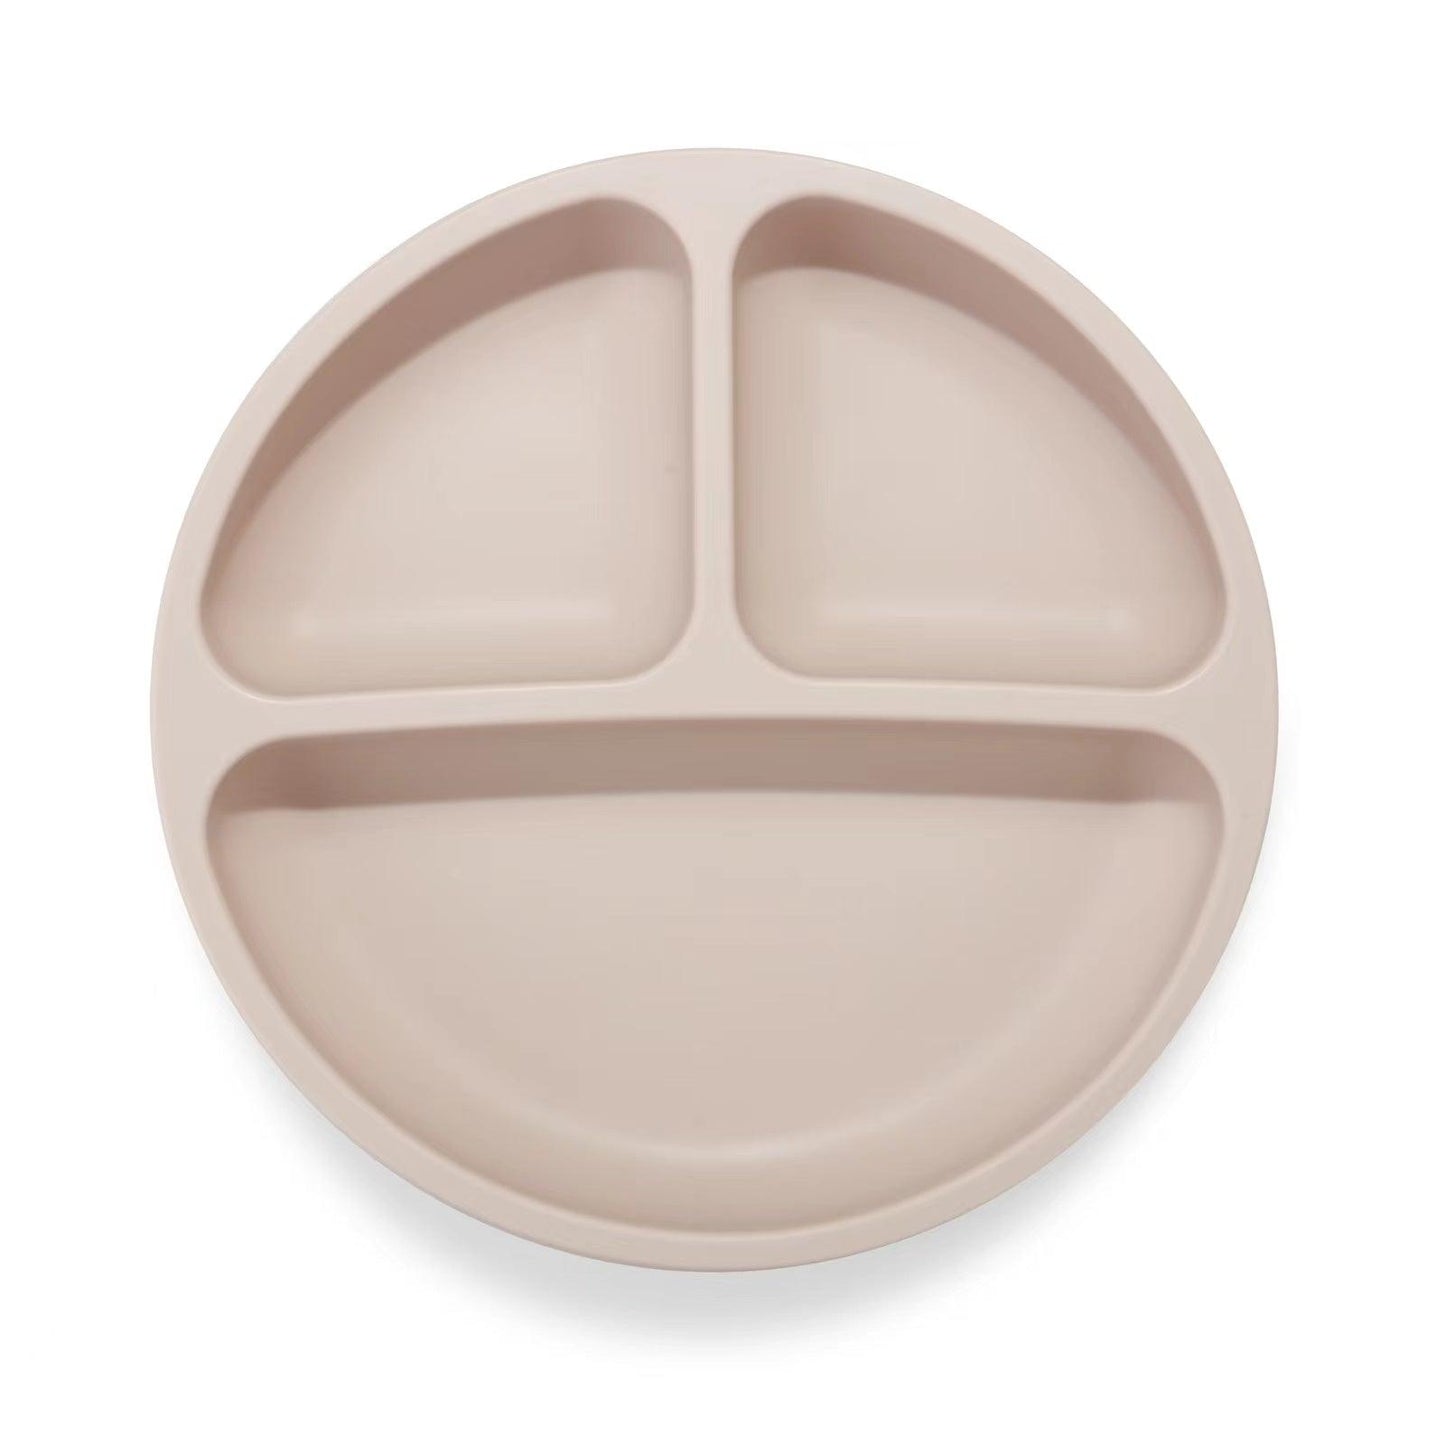 Divided Unbreakable Silicone Baby and Toddler Plates - PandaEar